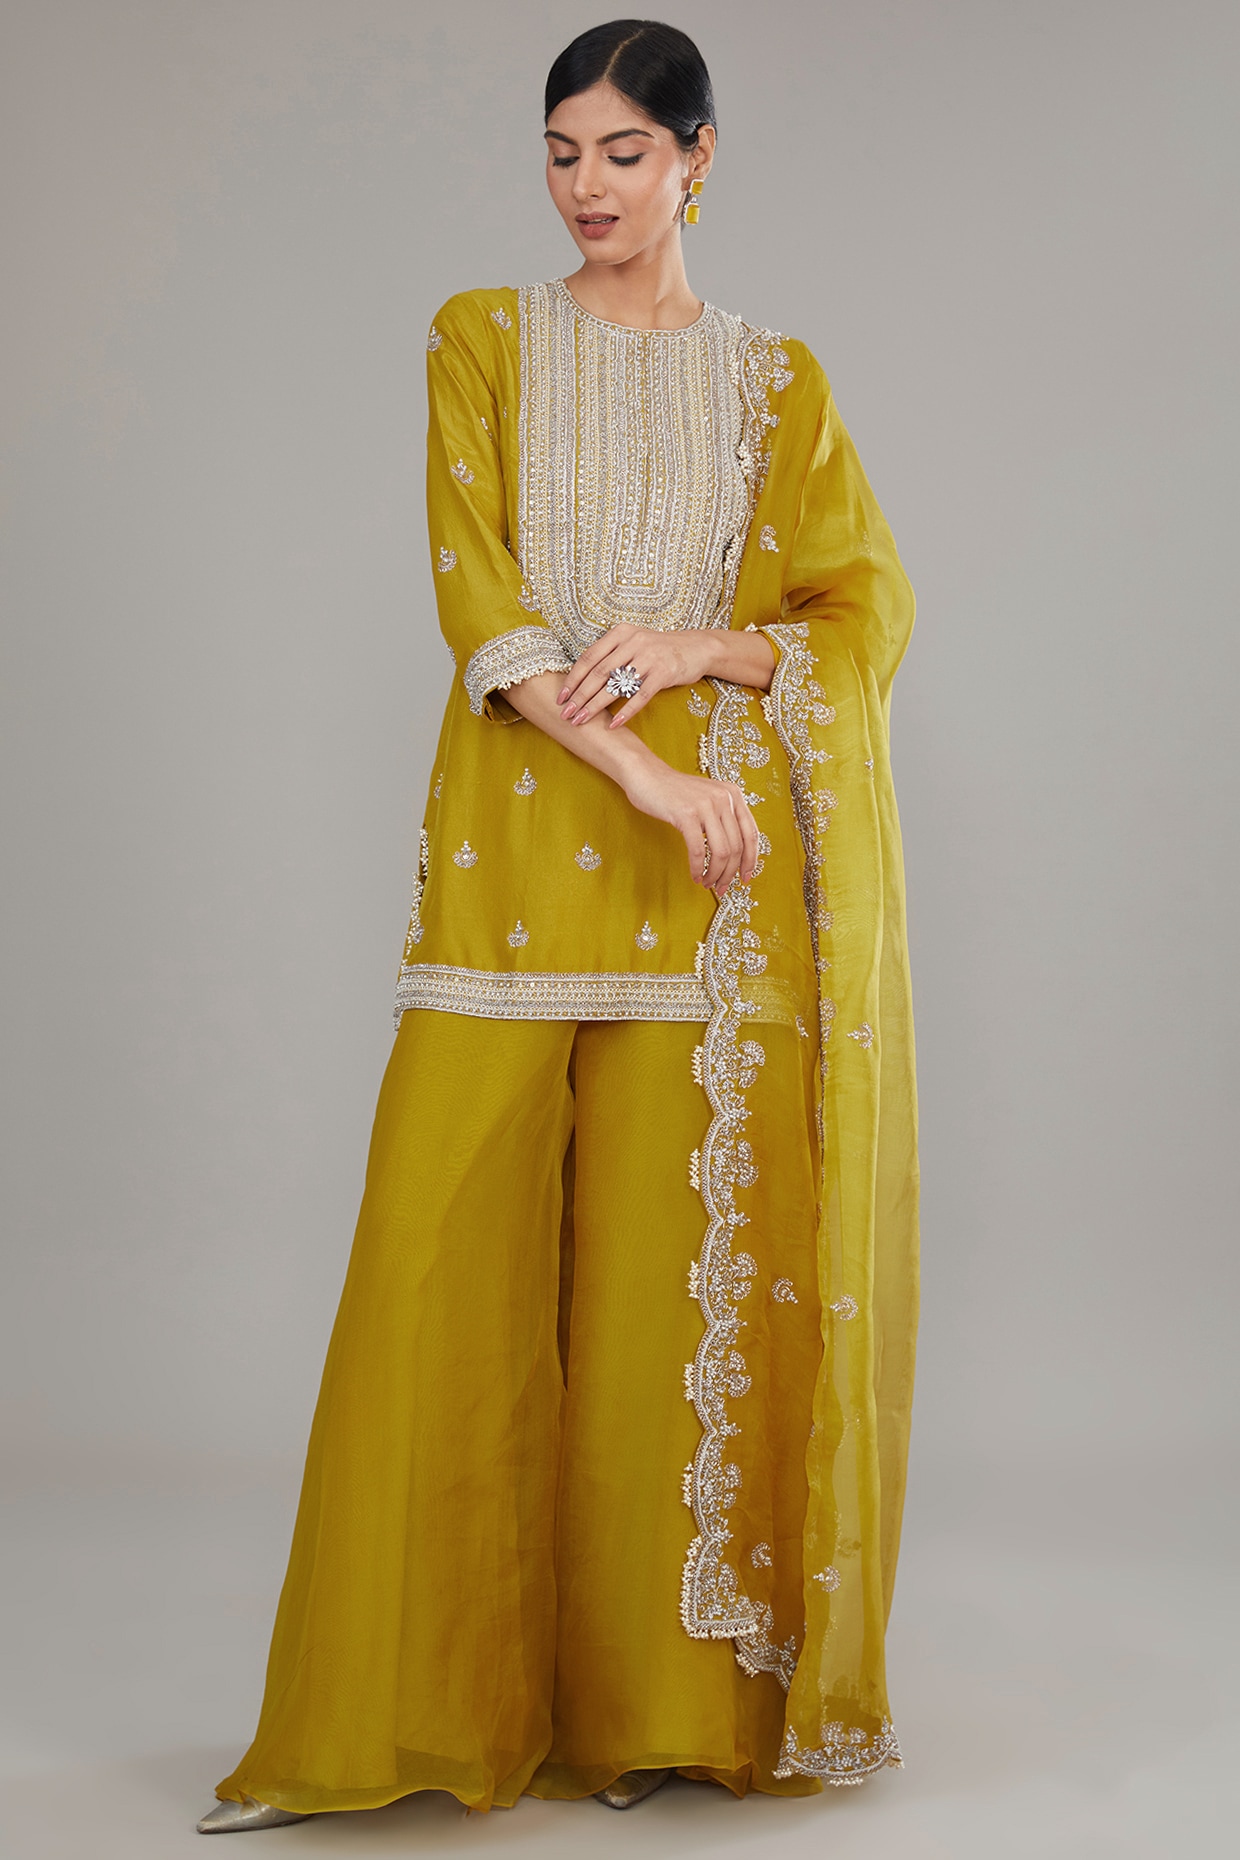 Discover 239+ chicken sharara suit